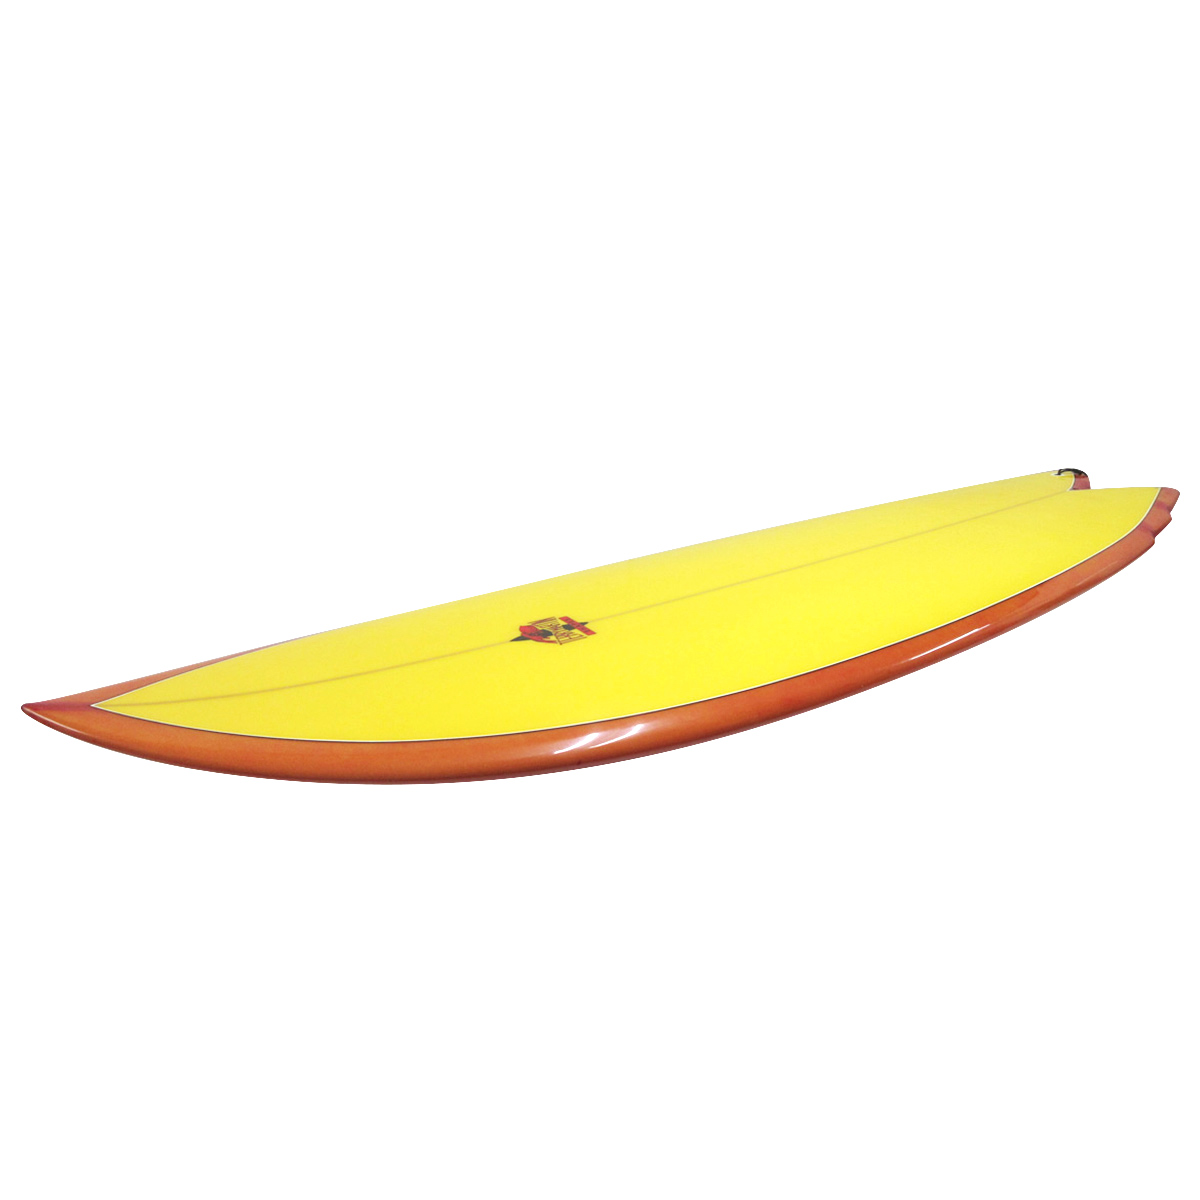 Country Surfboards / Doublewing Quad Fish Shaped by Terry Martin